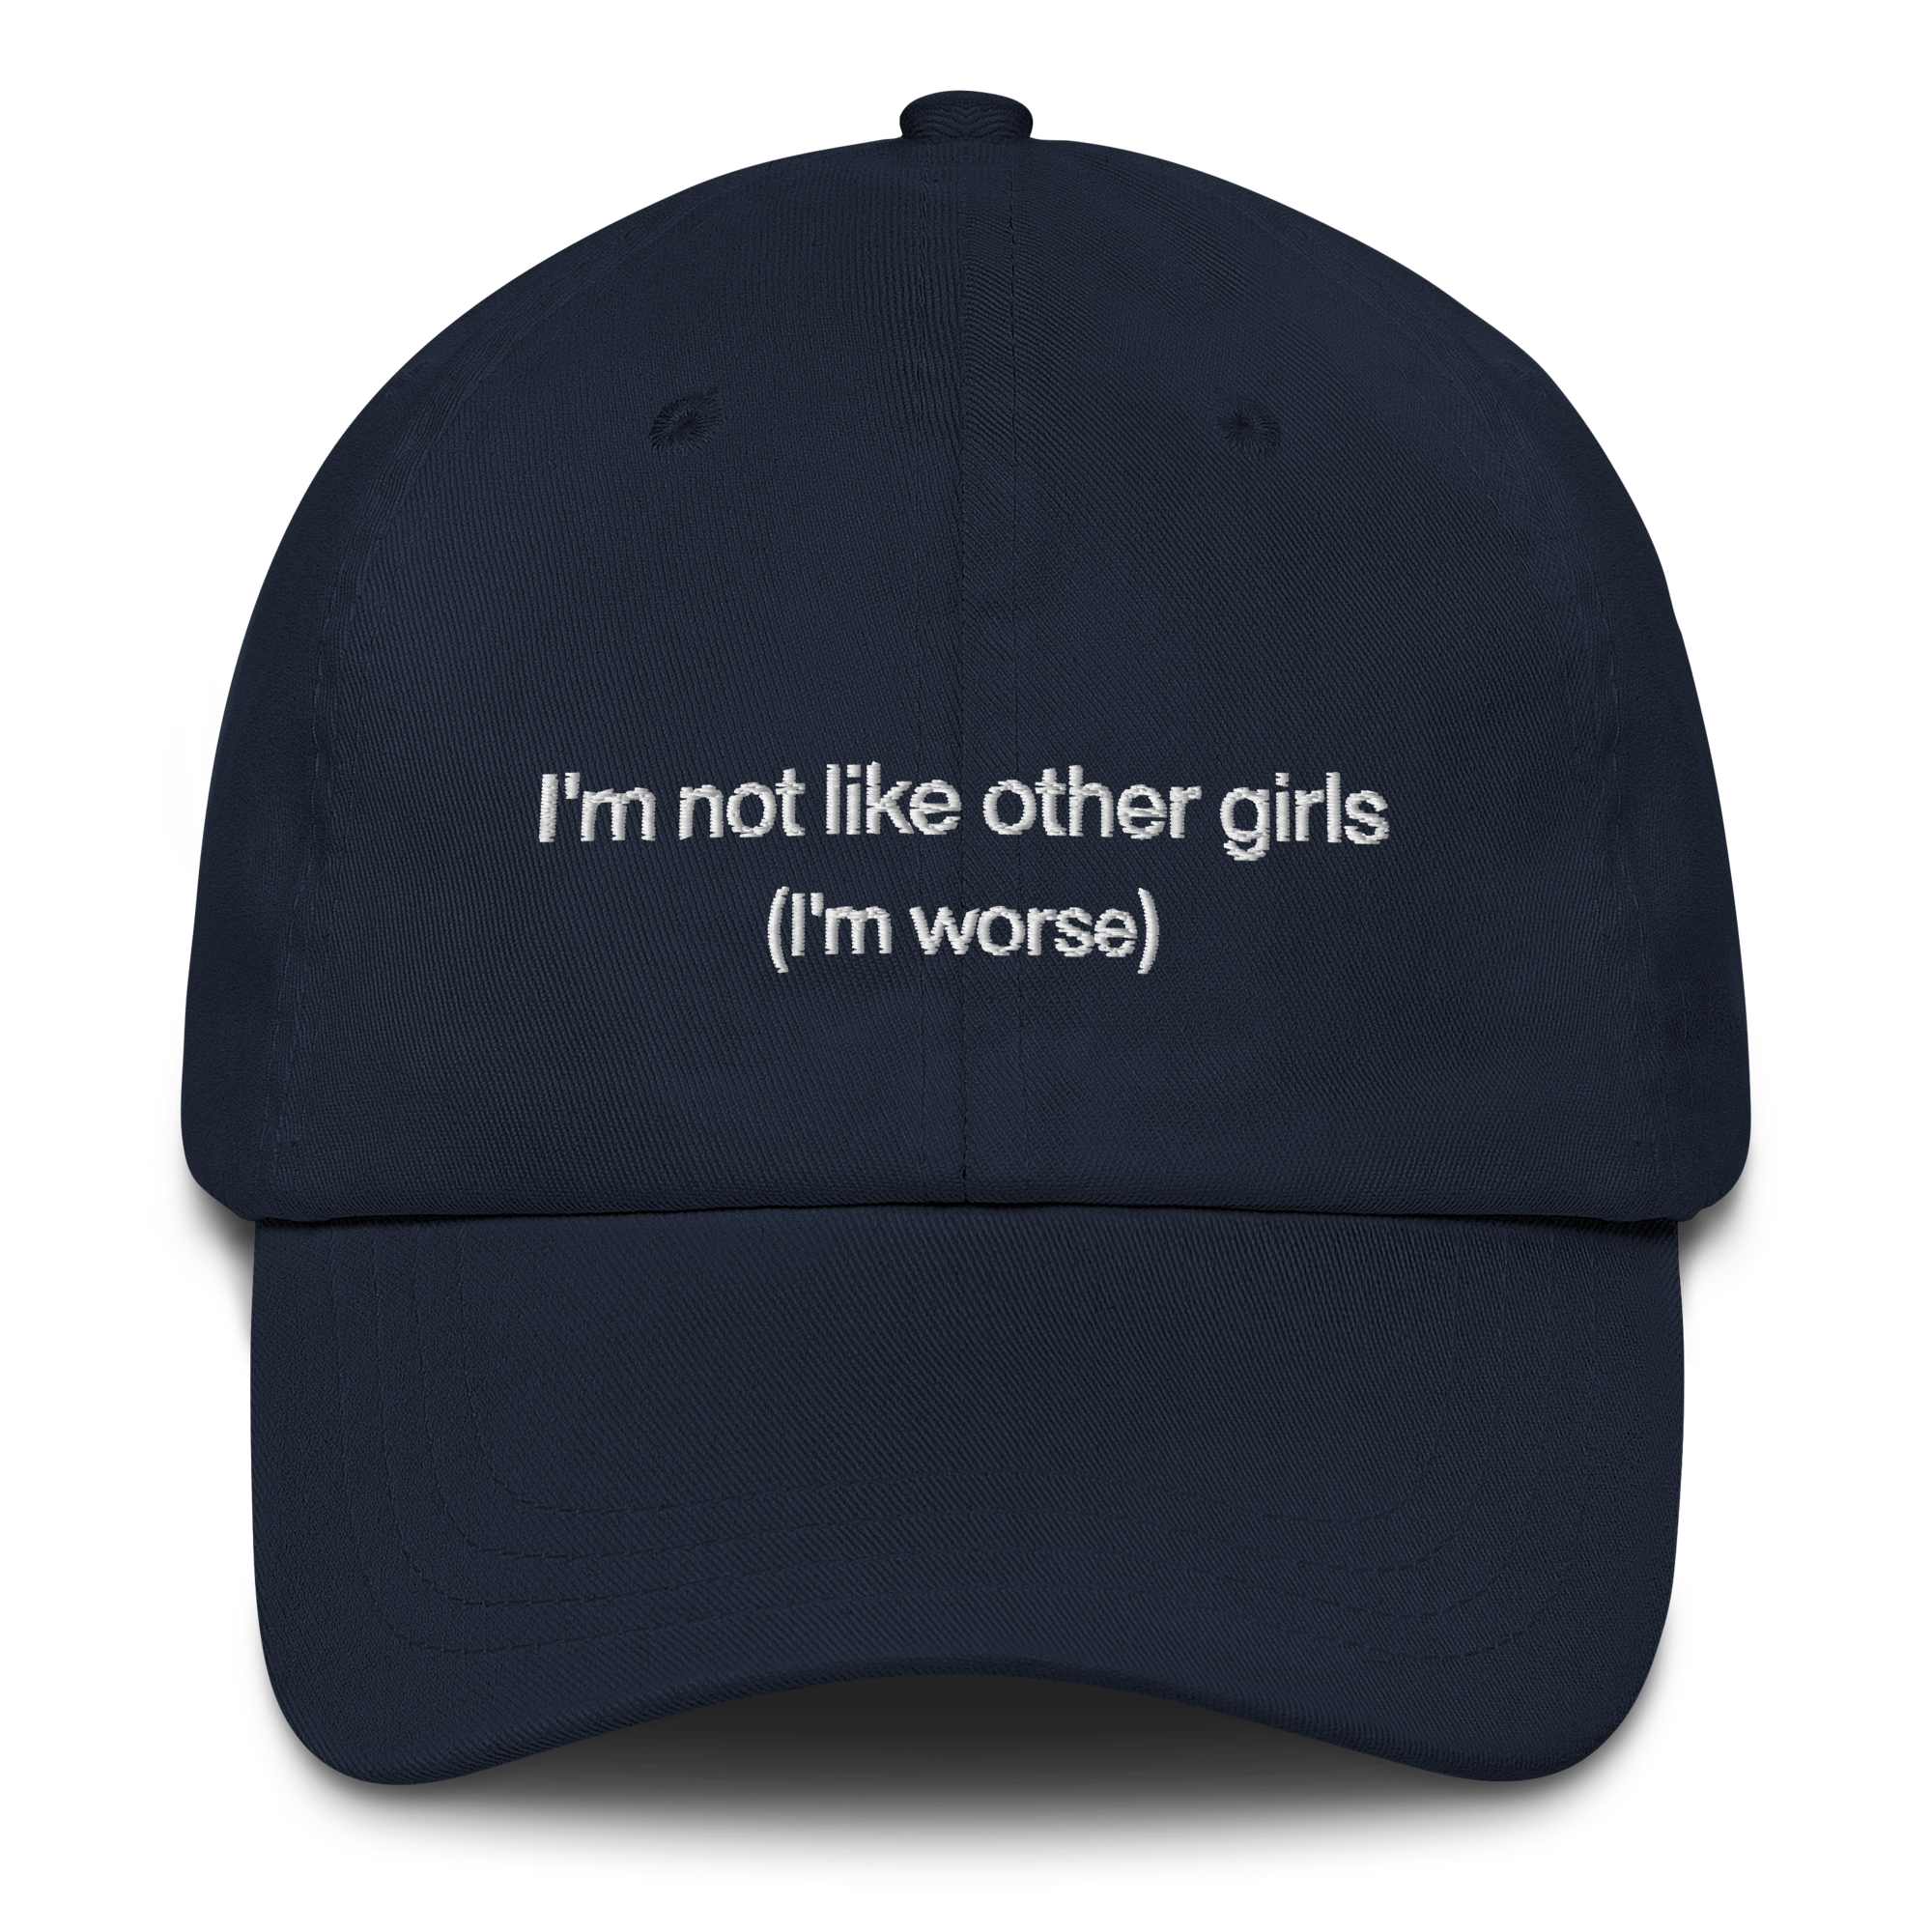 classic-dad-hat-navy-front-667b1f1207993.png